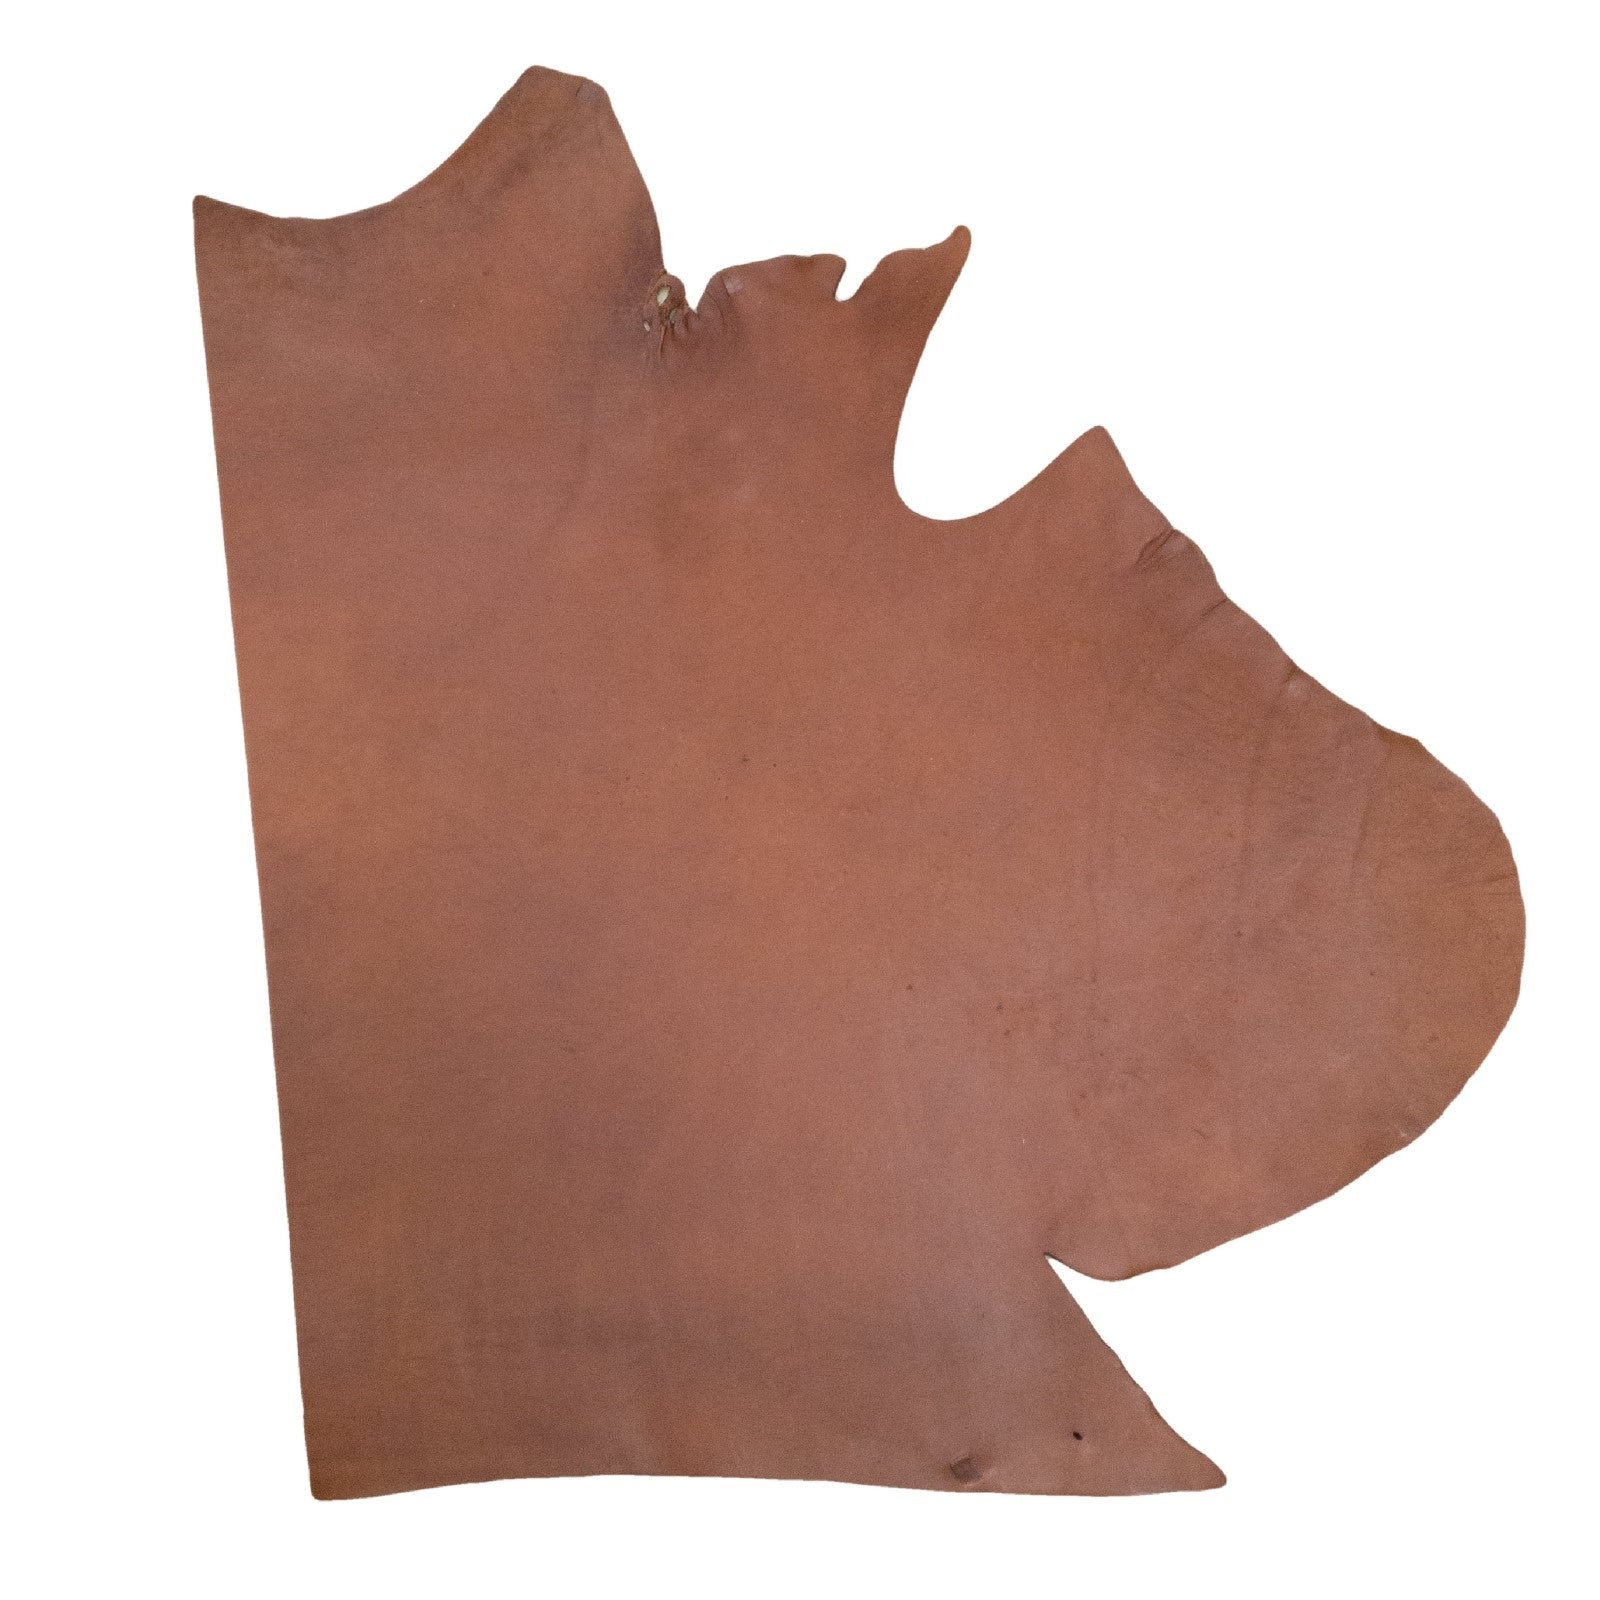 Dark Brown, 3-5 SqFt, 9-11 oz, Bridle Project Pieces,  | The Leather Guy